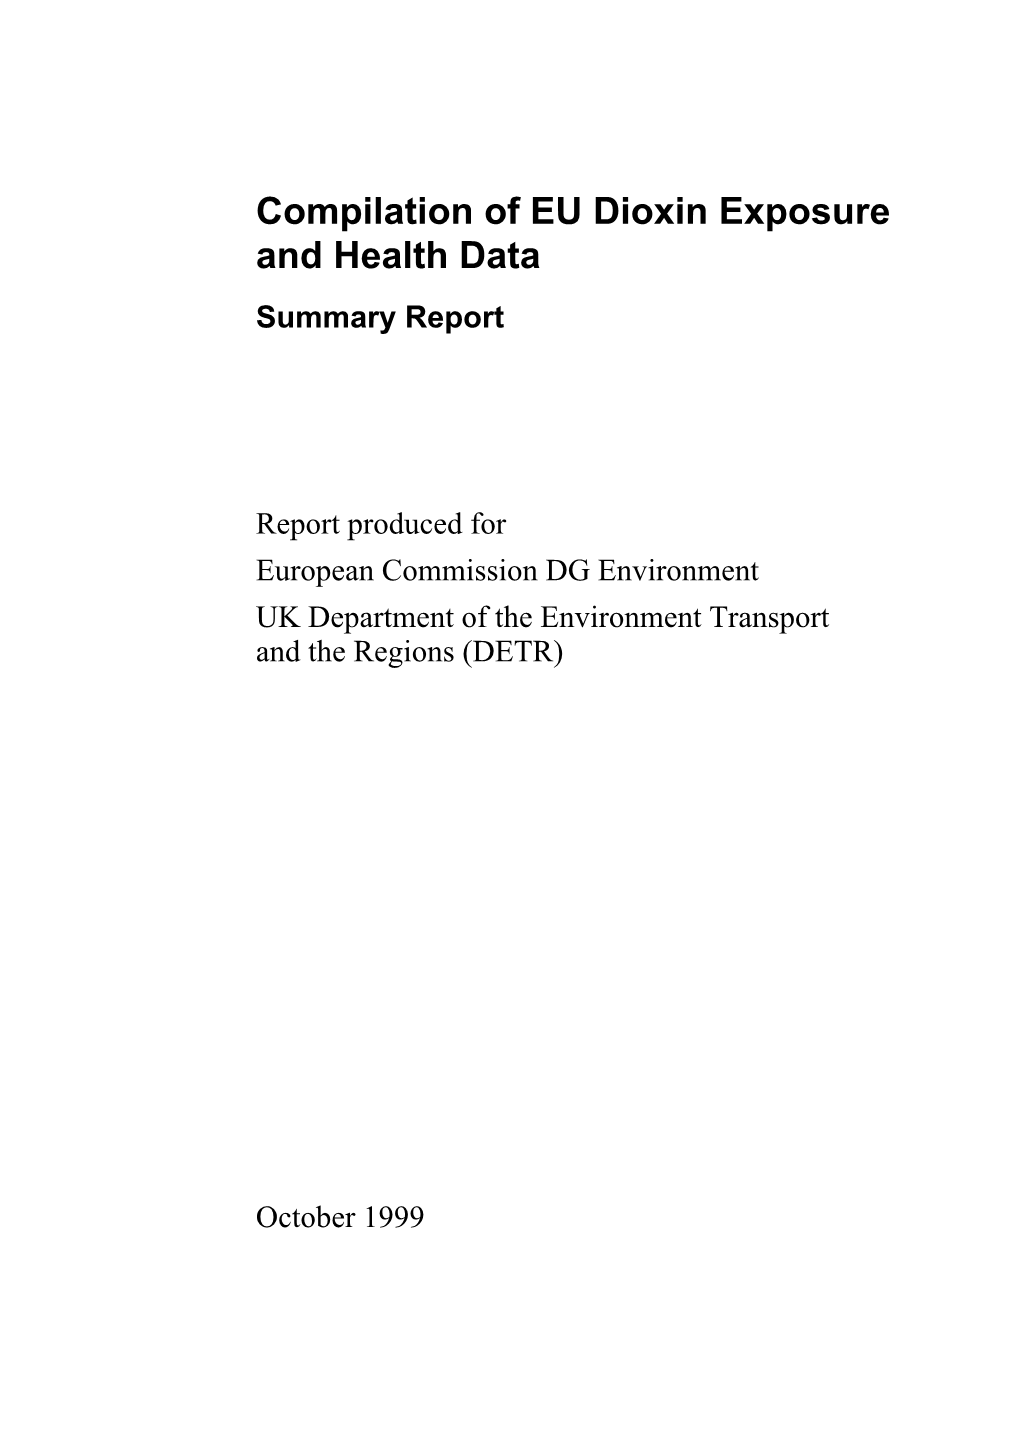 Compilation of EU Dioxin Exposure and Health Data Summary Report